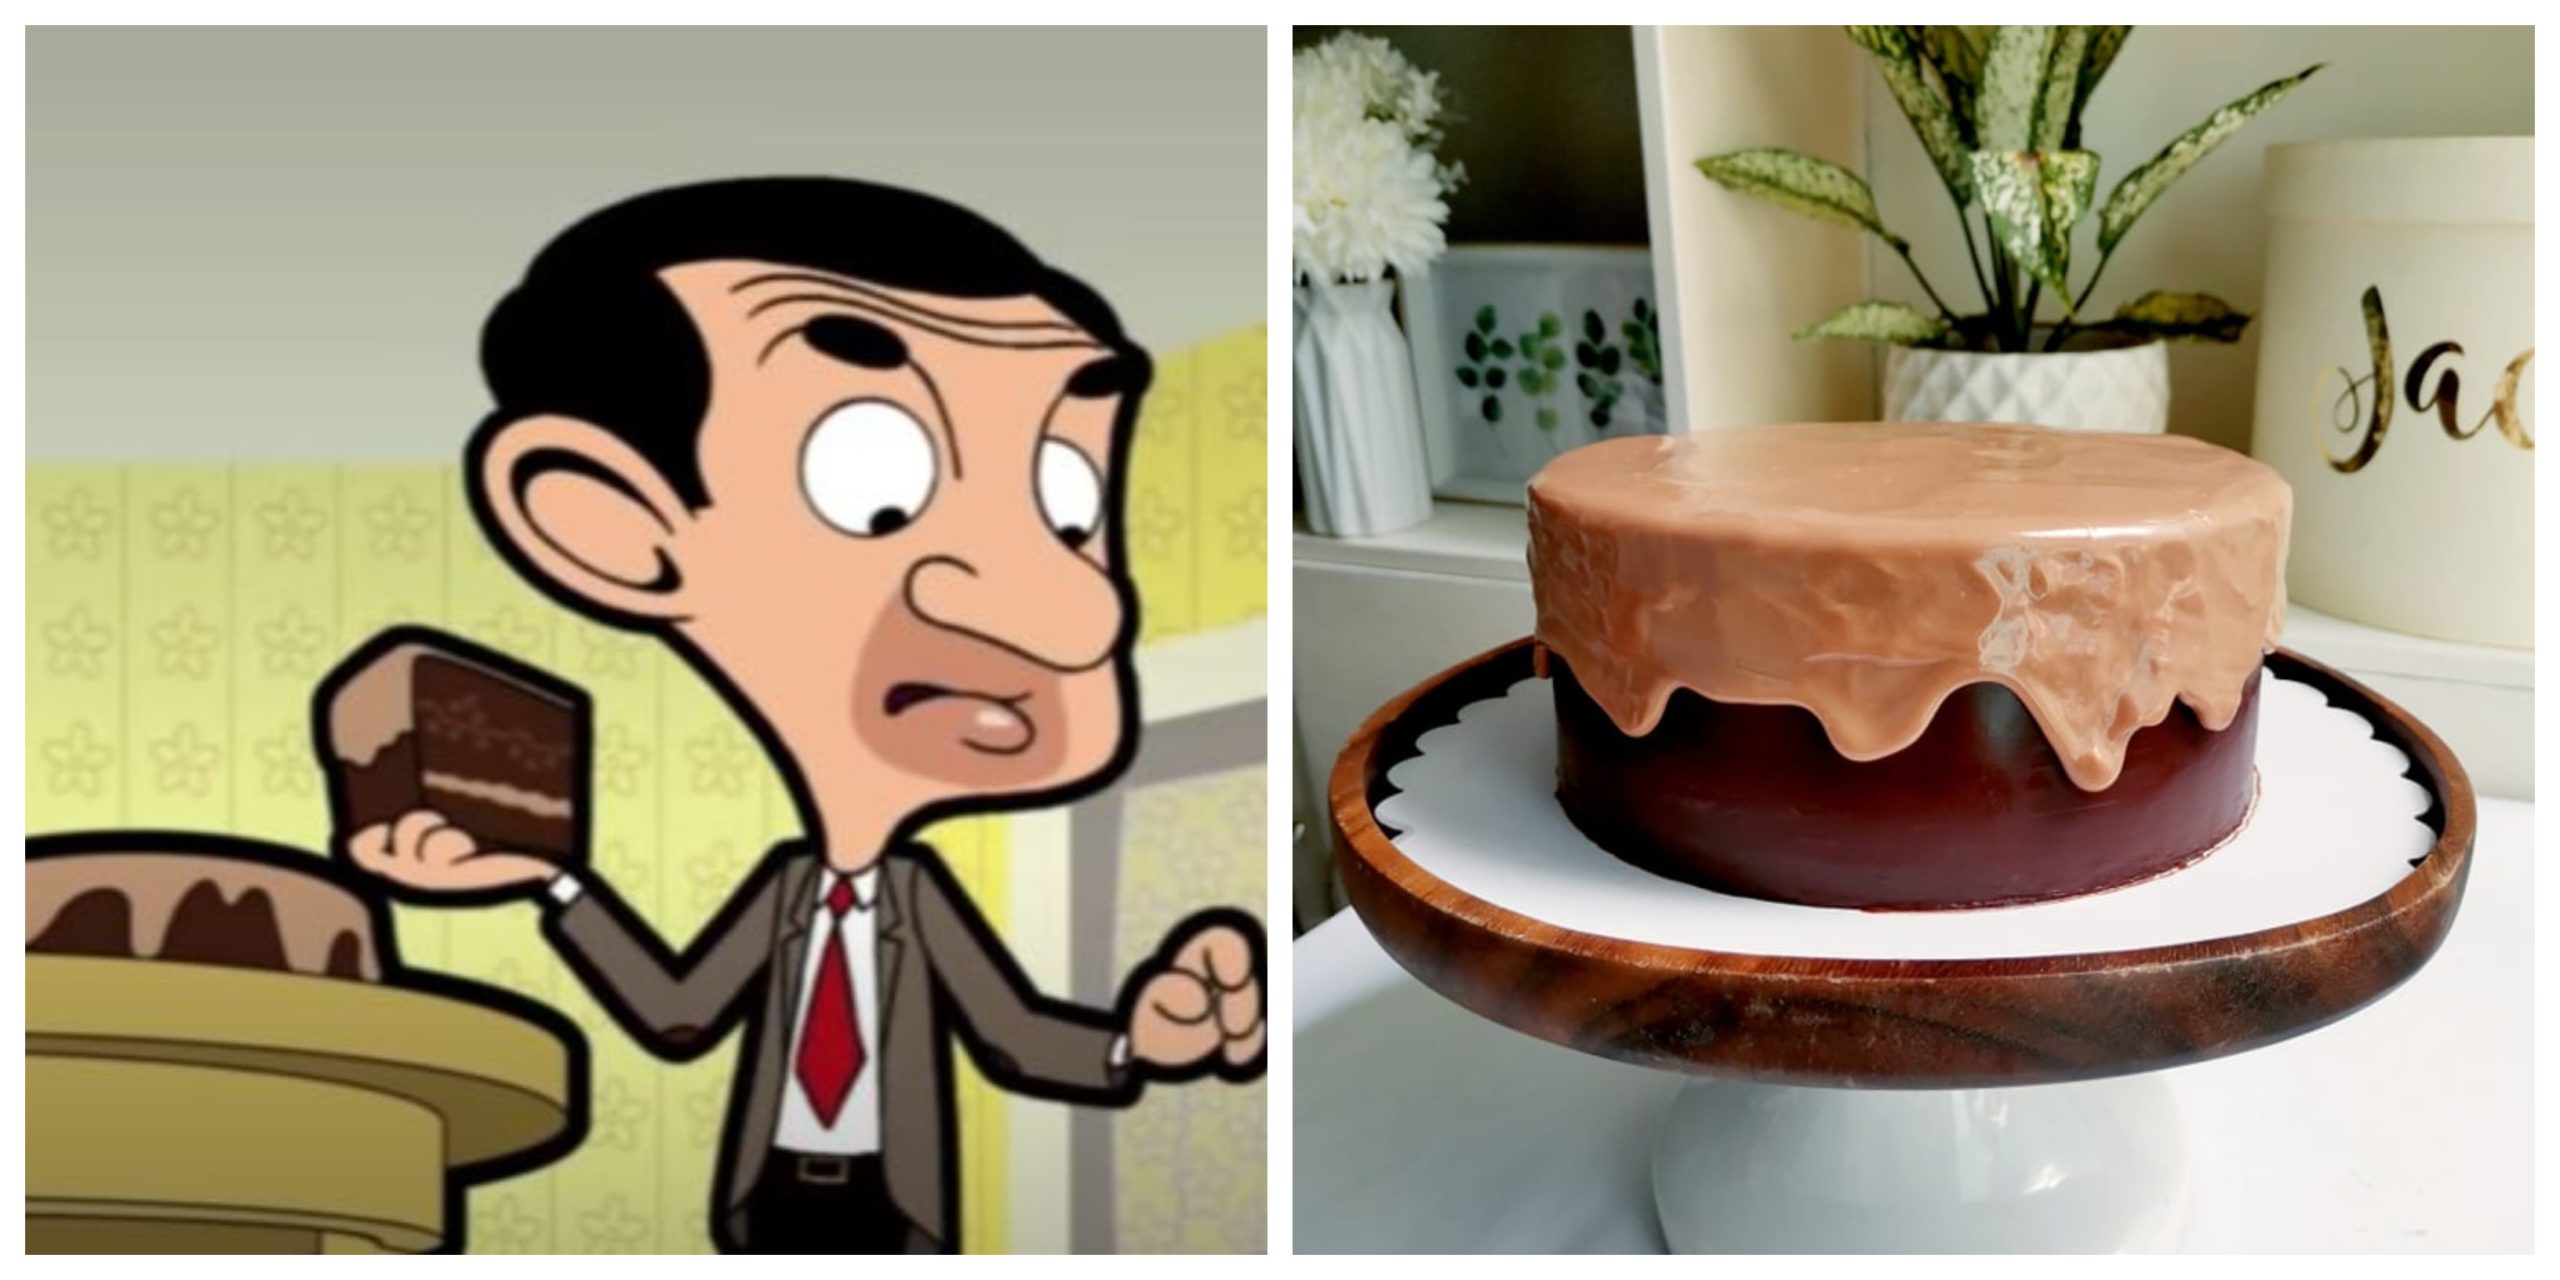 Mr. Bean and Jacee Uy’s version of his chocolate cake. Screenshot from Mr. Bean/Youtube and photo from Uy